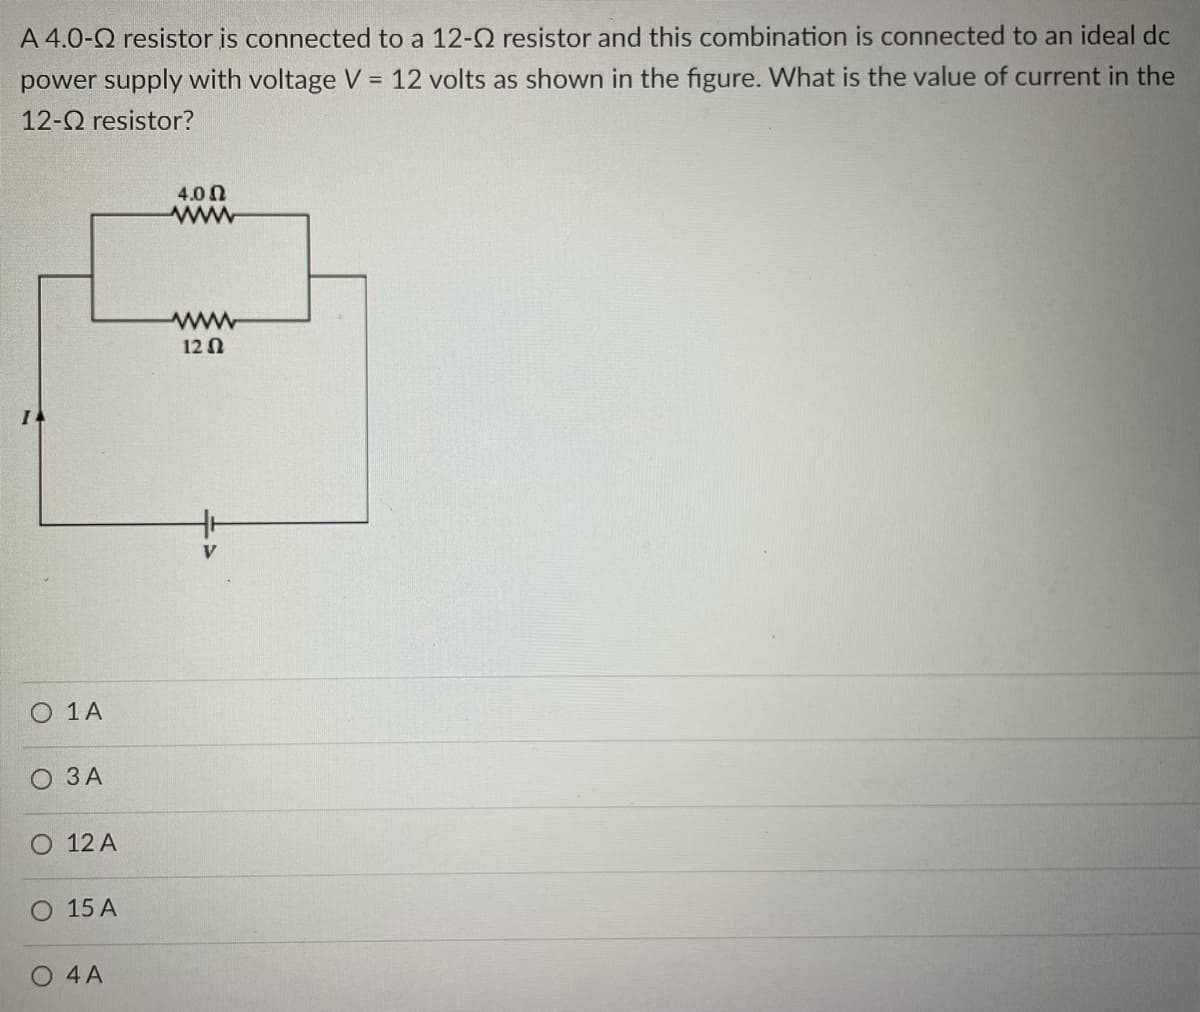 A 4.0-2 resistor is connected to a 12-02 resistor and this combination is connected to an ideal dc
power supply with voltage V = 12 volts as shown in the figure. What is the value of current in the
12- resistor?
O 1 A
O 3 A
12 A
O 15 A
O 4 A
4.00
www
www
1202